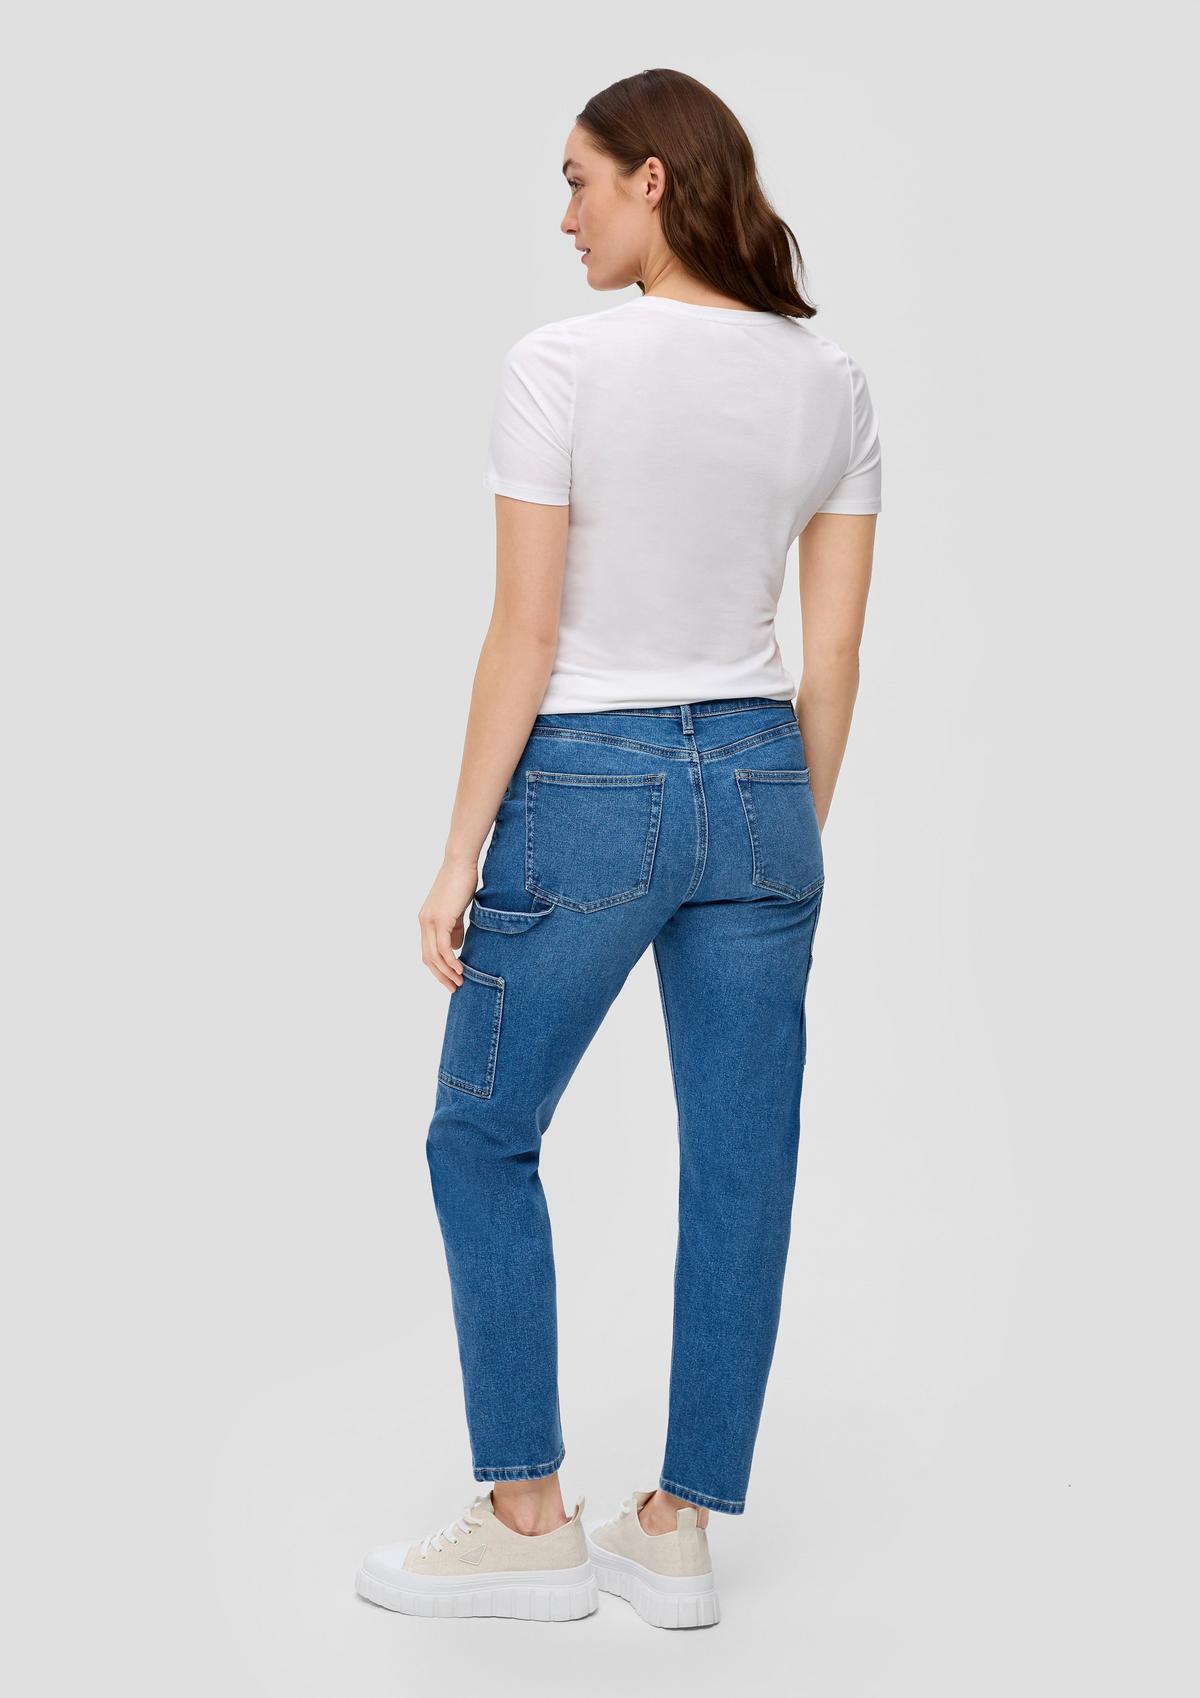 s.Oliver 360° Denim / Ankle Jeans Francis / Relaxed Fit / Mid Rise / Tapered Leg / Boyfriend